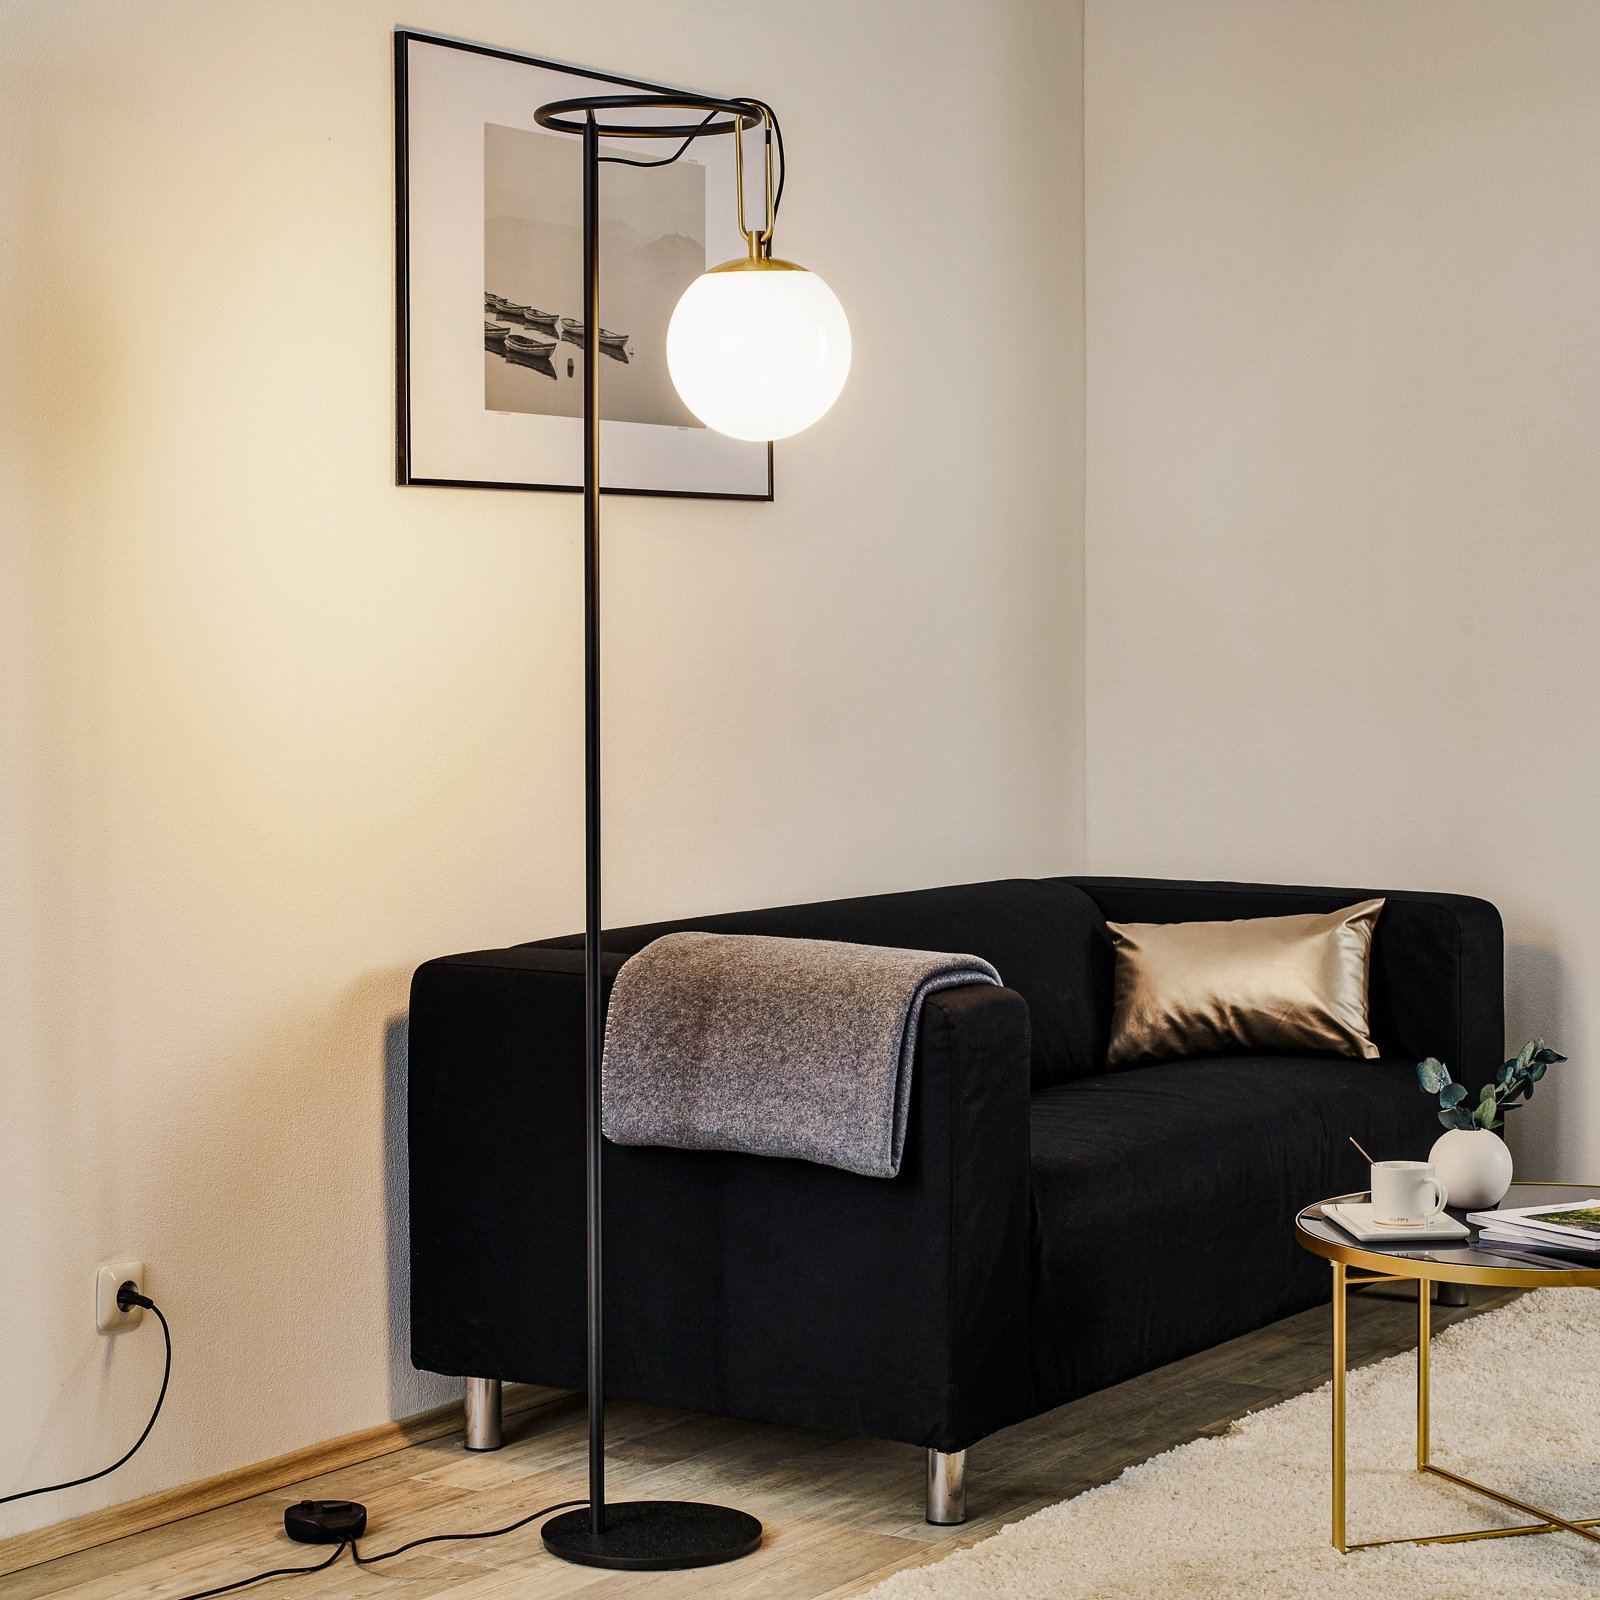 Artemide nh floor lamp with a dimmer